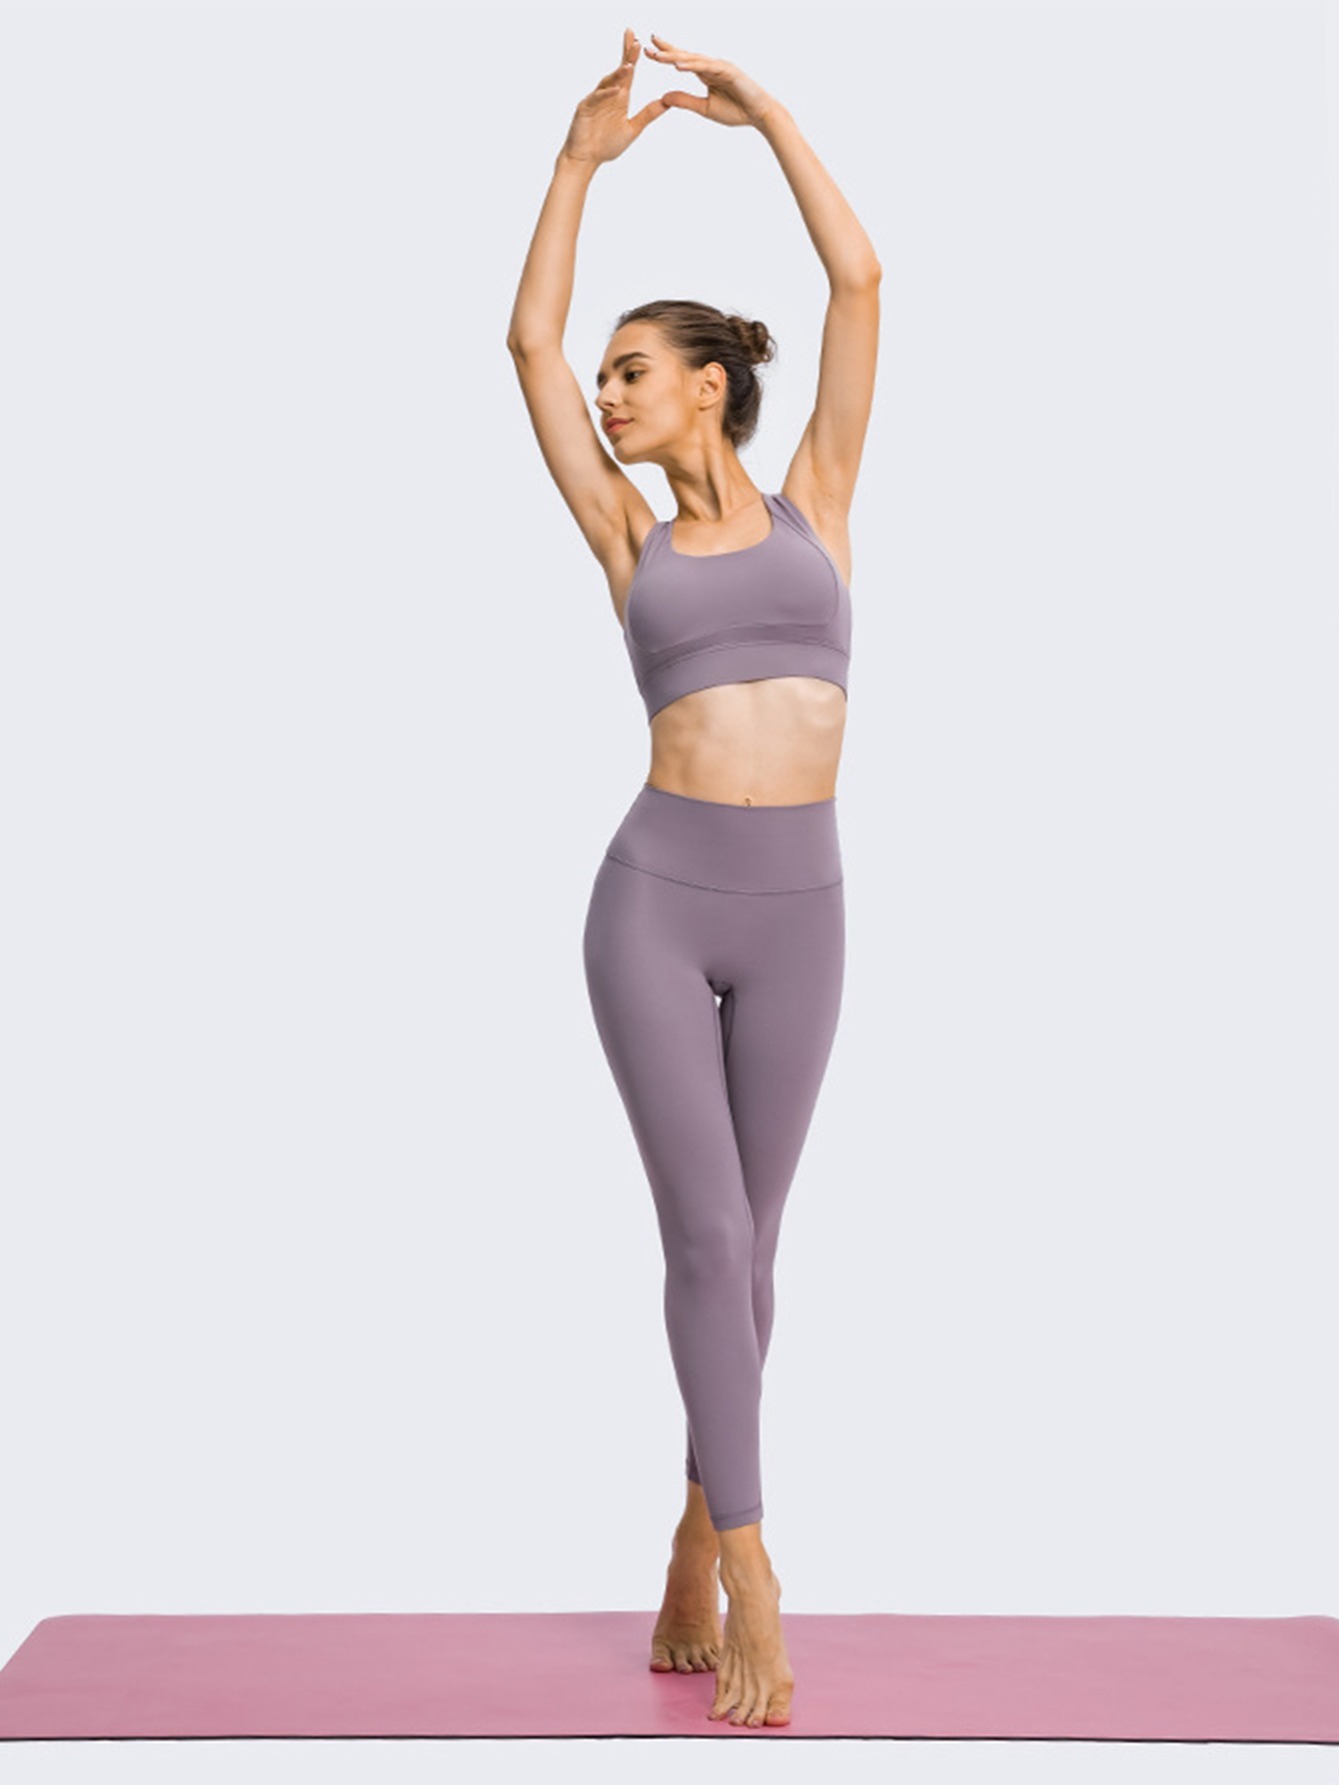 Sports WEAR - Ladies gym tights.. choice of 6 colors in 5